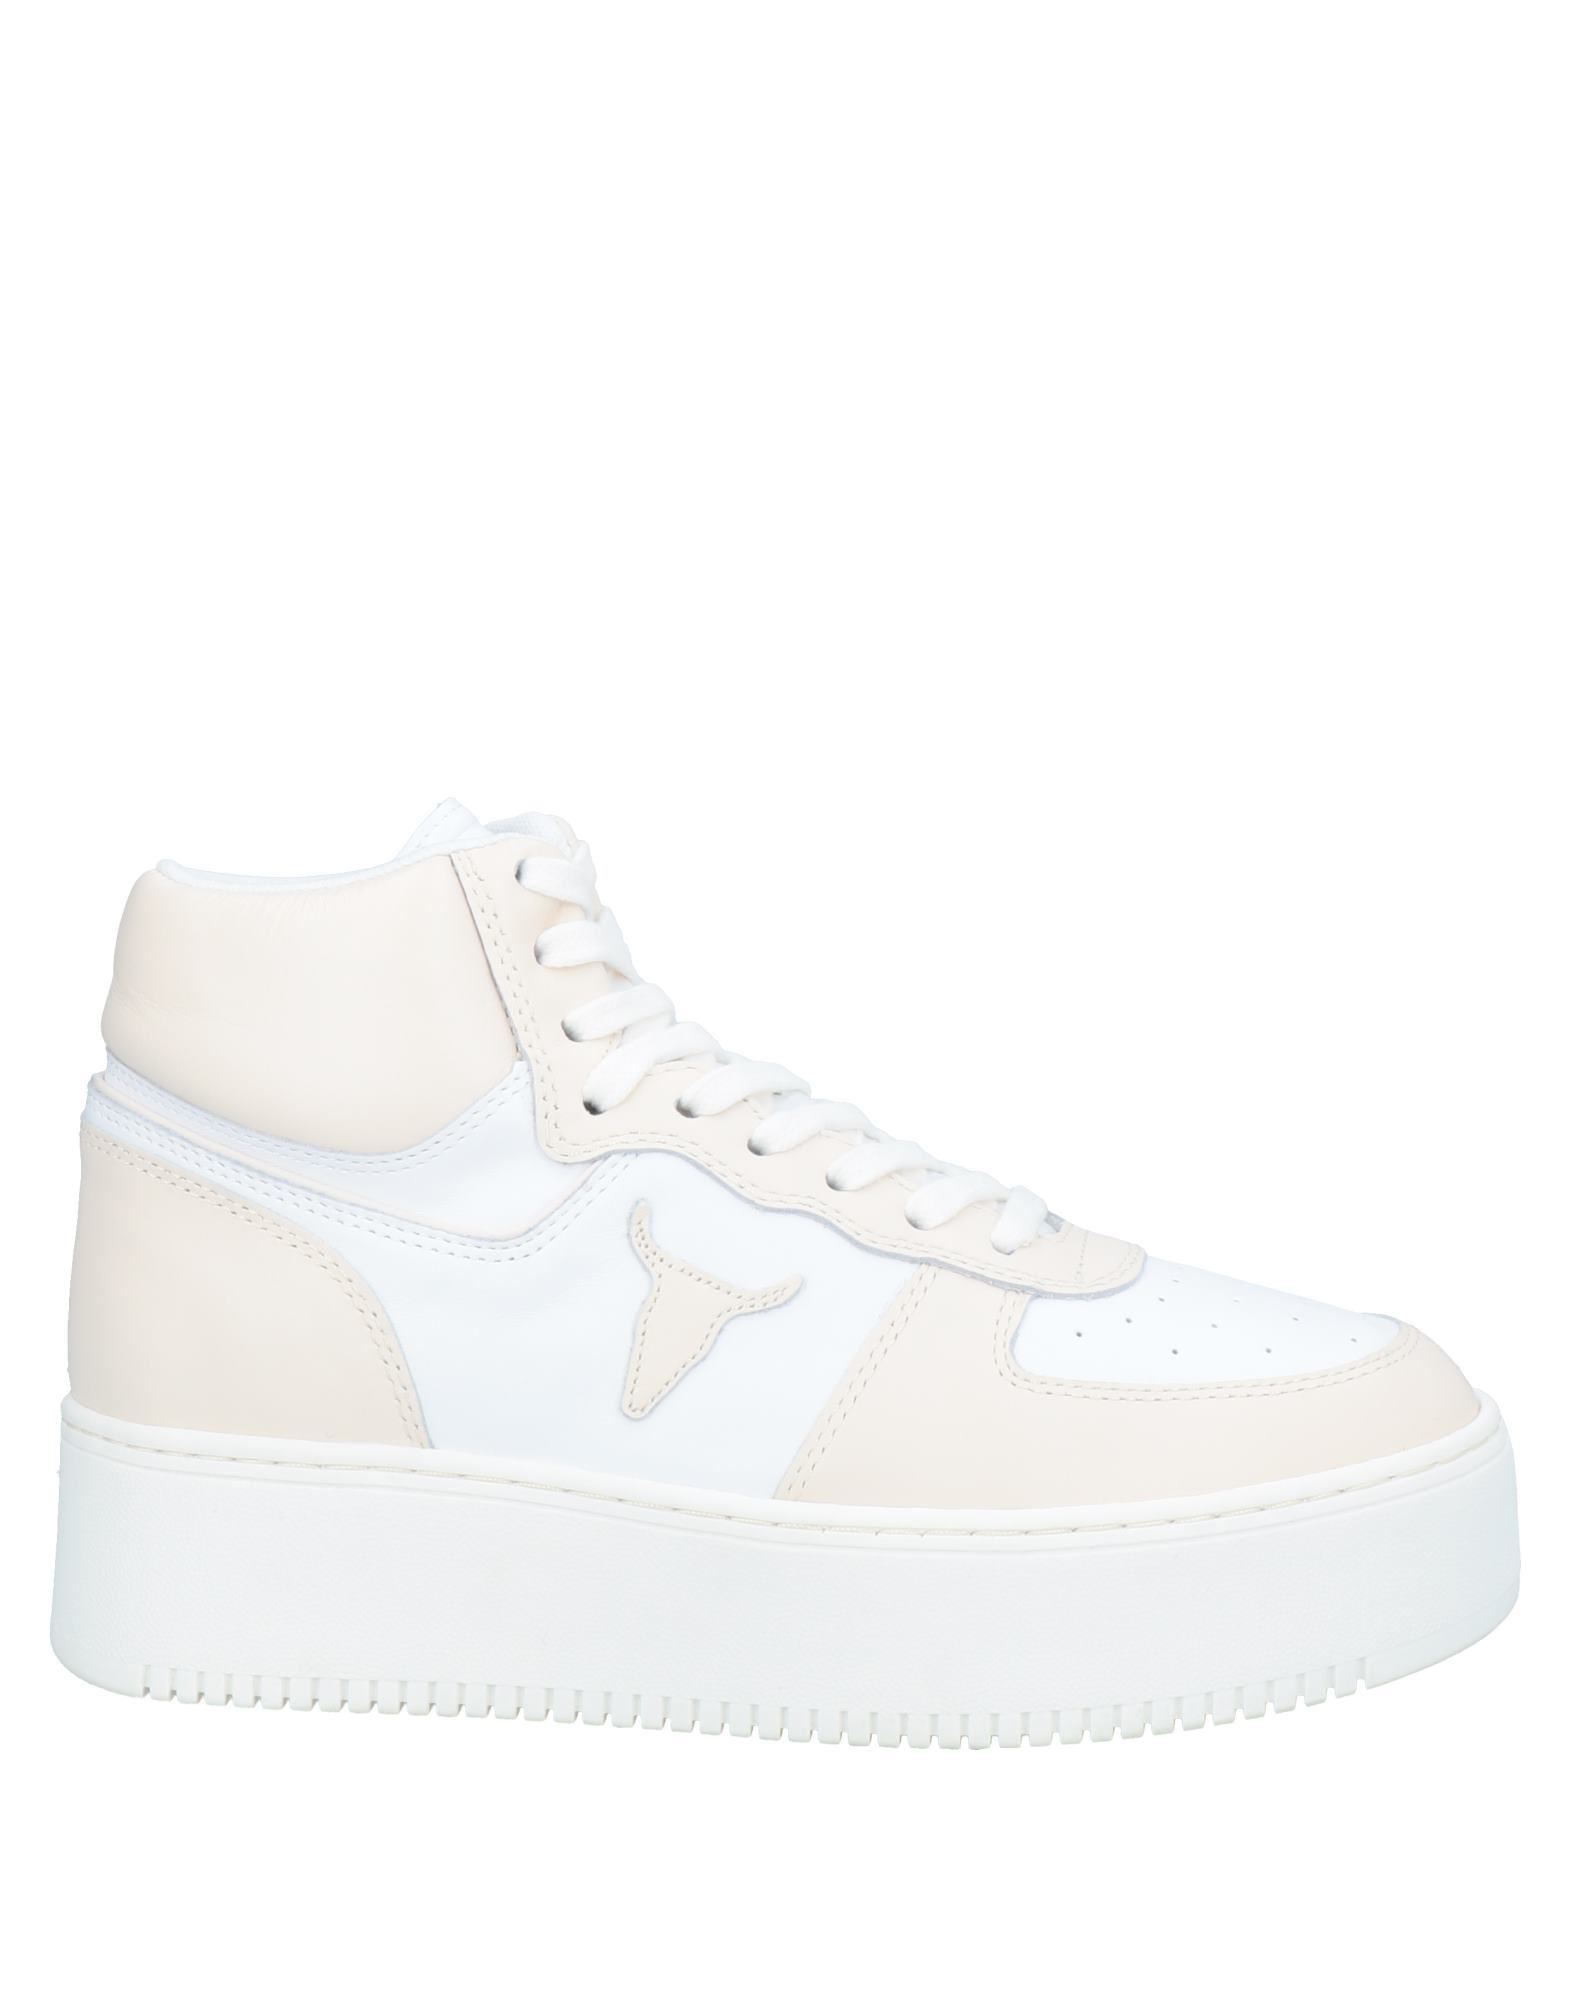 Windsor Smith Sneakers In Pink